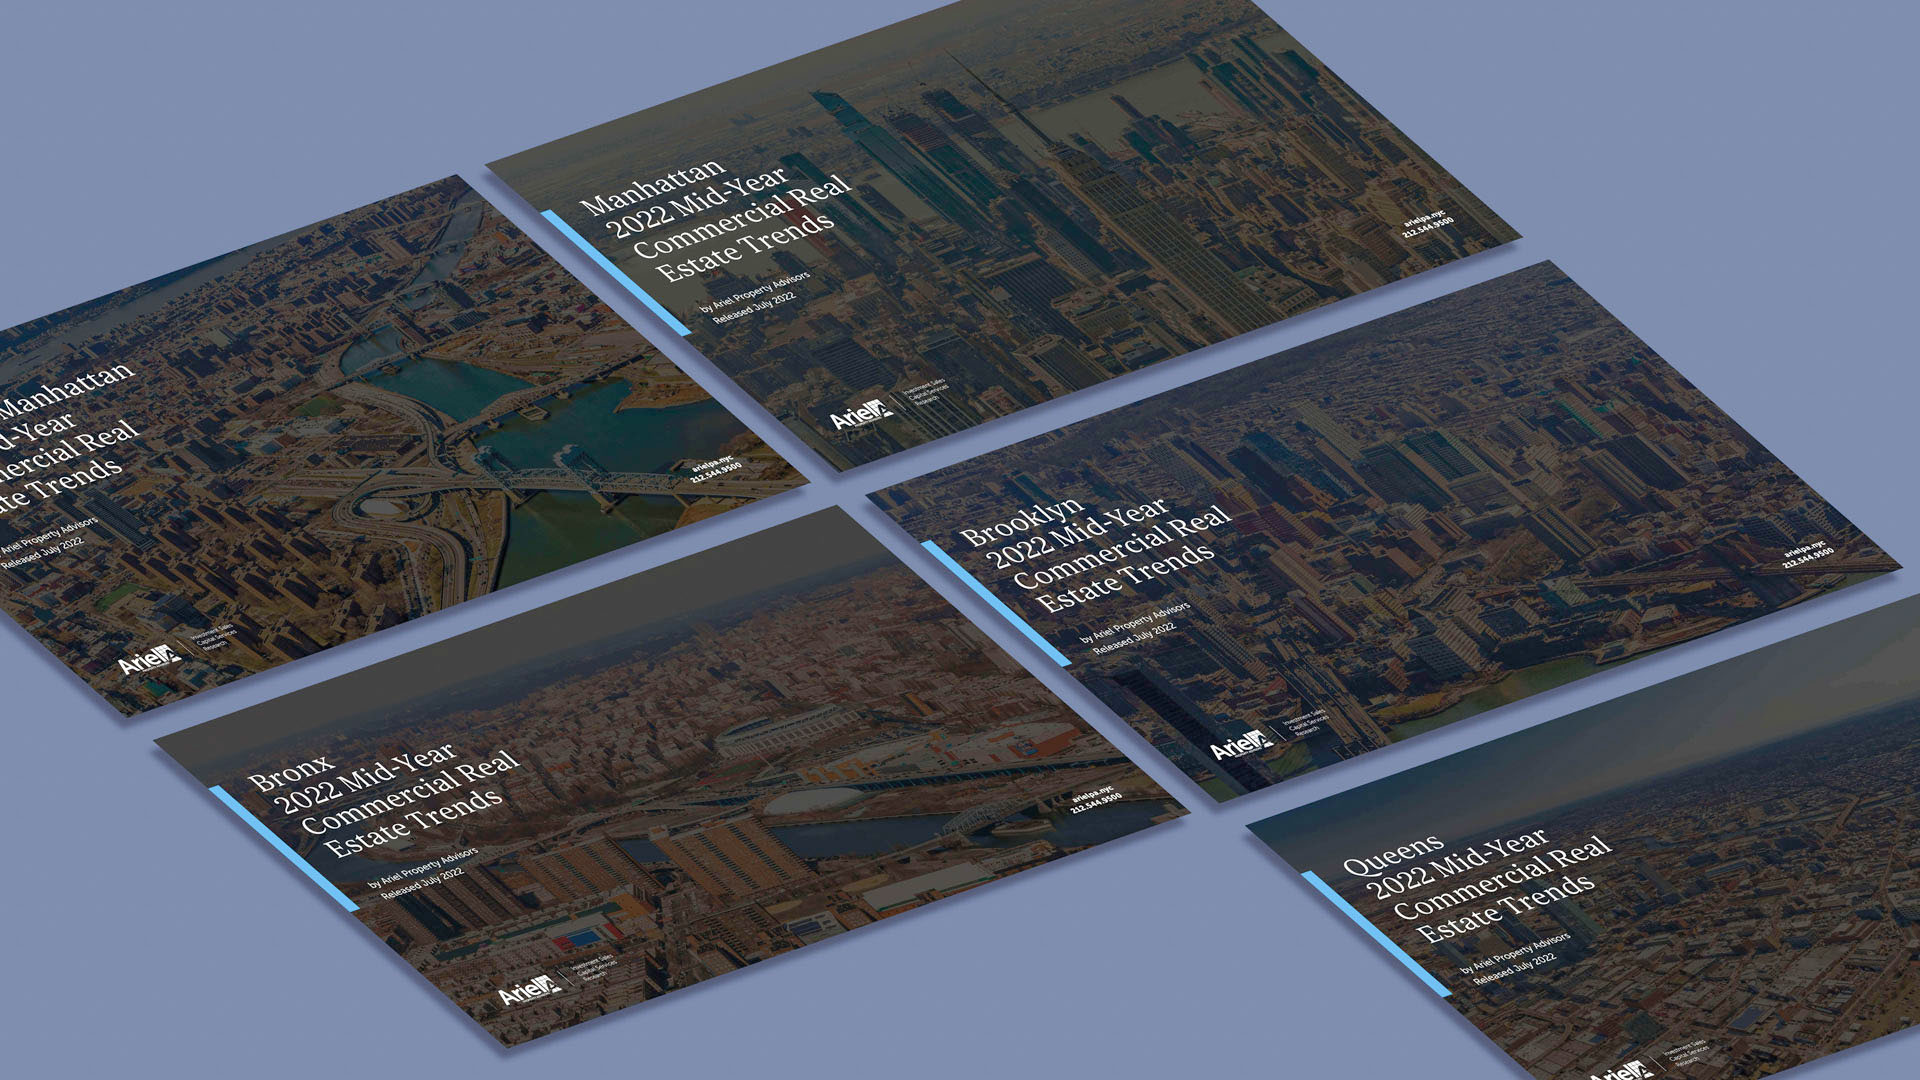 A detailed market insights and analysis of 2022 Mid-Year Commercial Real Estate Trends for Northern Manhattan, Manhattan, Queens, Brooklyn, and the Bronx